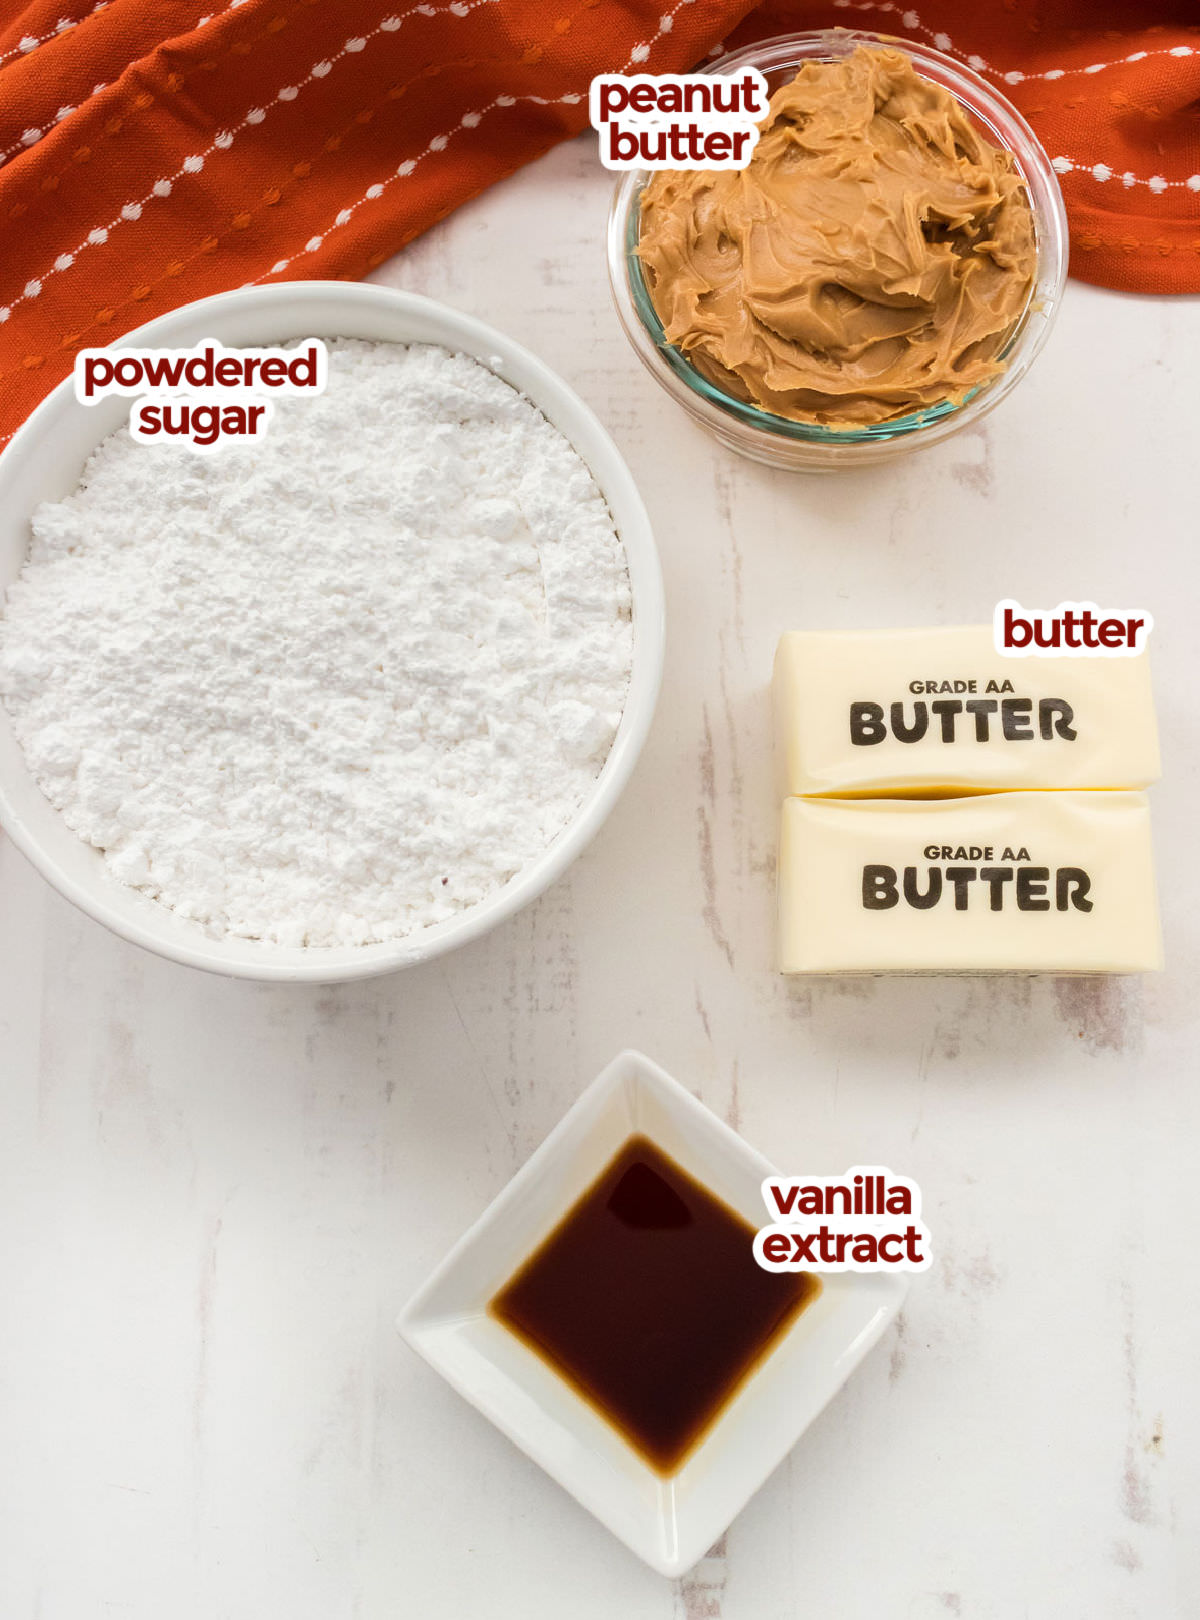 All the ingredients you will need to make Easy Peanut Butter Fudge including Peanut Butter, Powdered Sugar, Butter and Vanilla Extract.